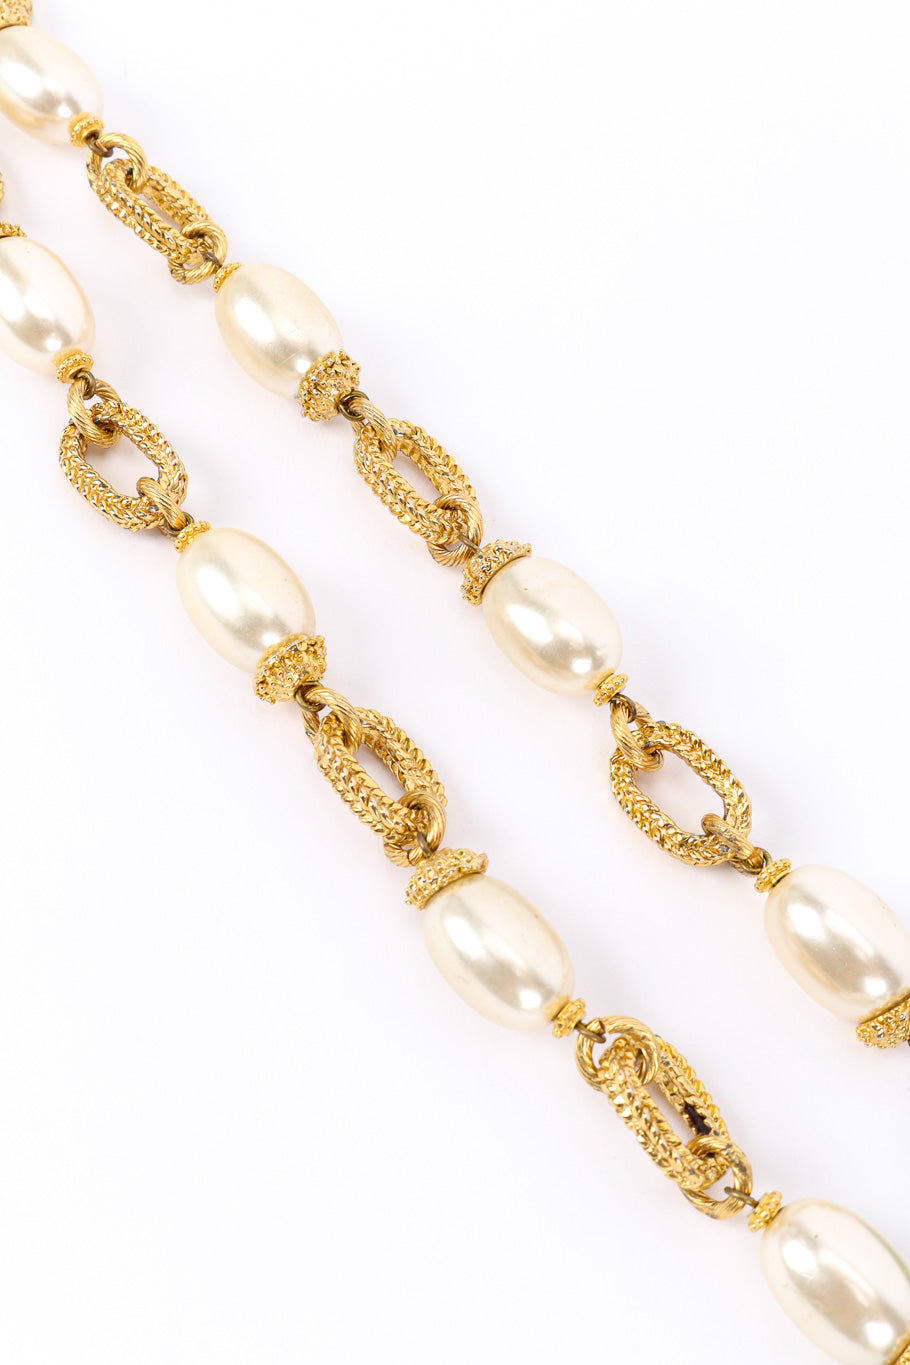 Vintage Monette of Paris Pearl & Glass Bead Necklace II chainlink and pearl closeup on a white backdrop @Recessla